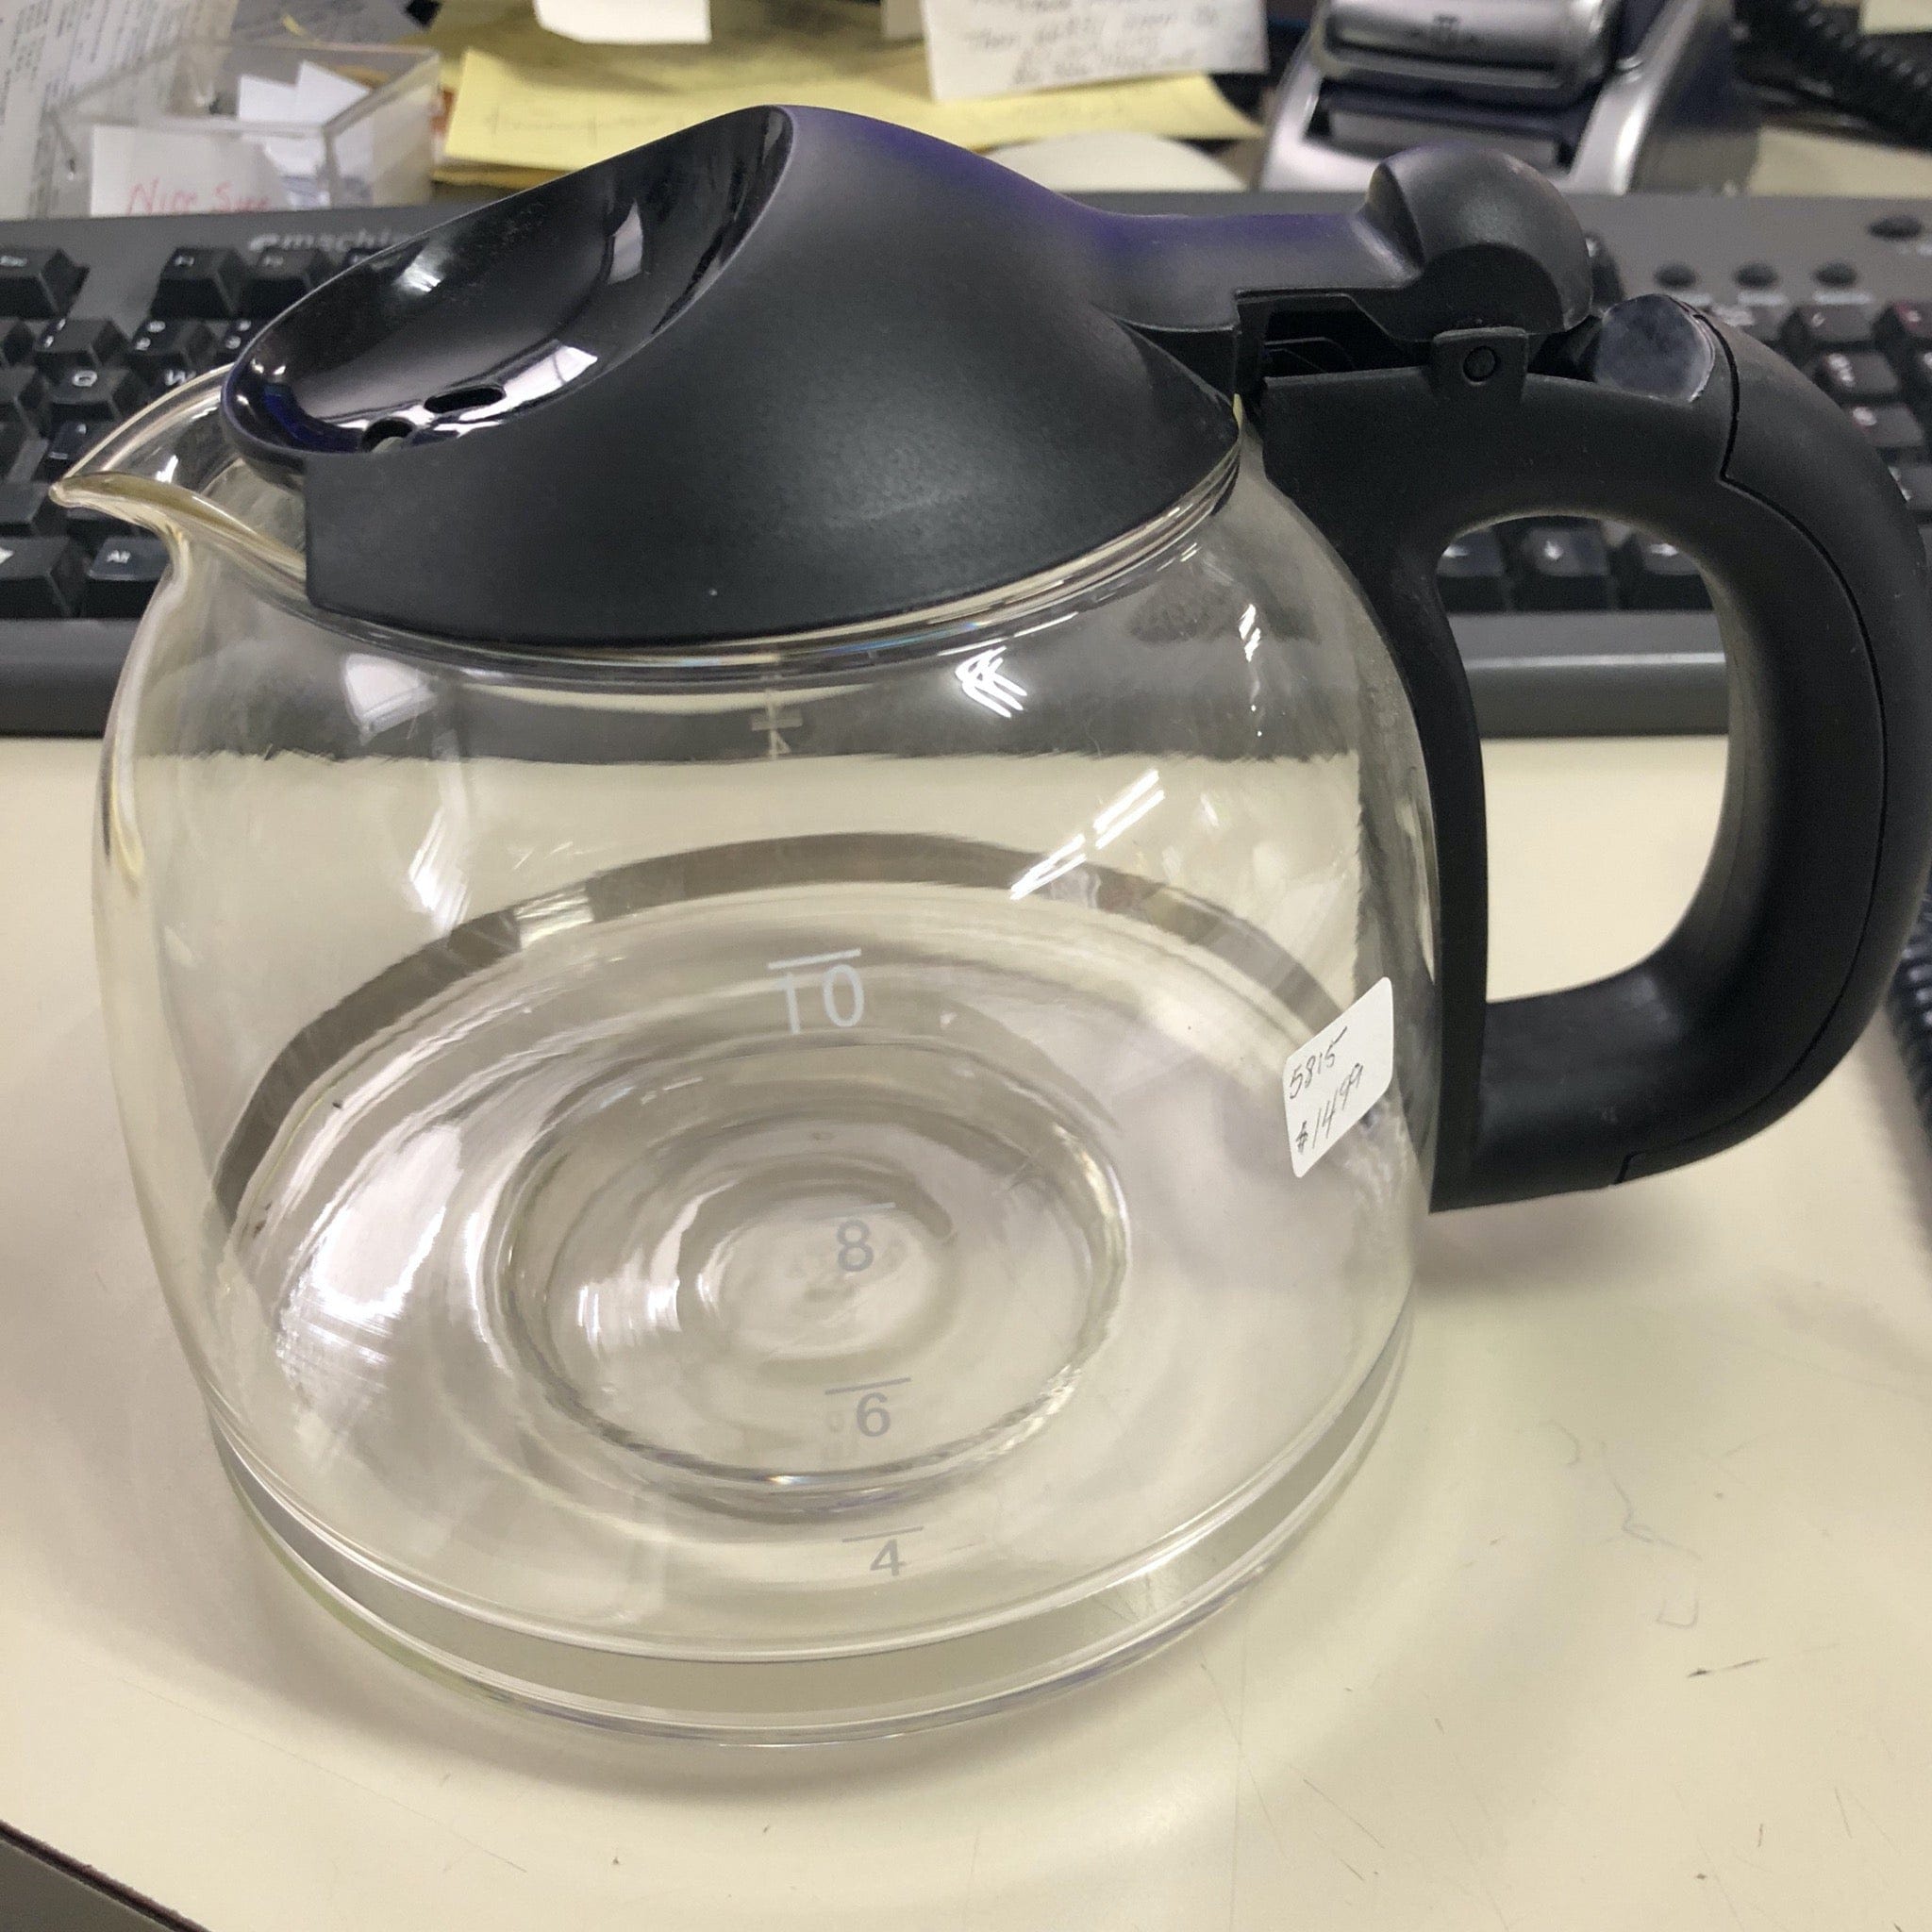 W11358307G by KitchenAid - Glass Carafe with Lid (Fits model KCM1208 and  KCM1209)